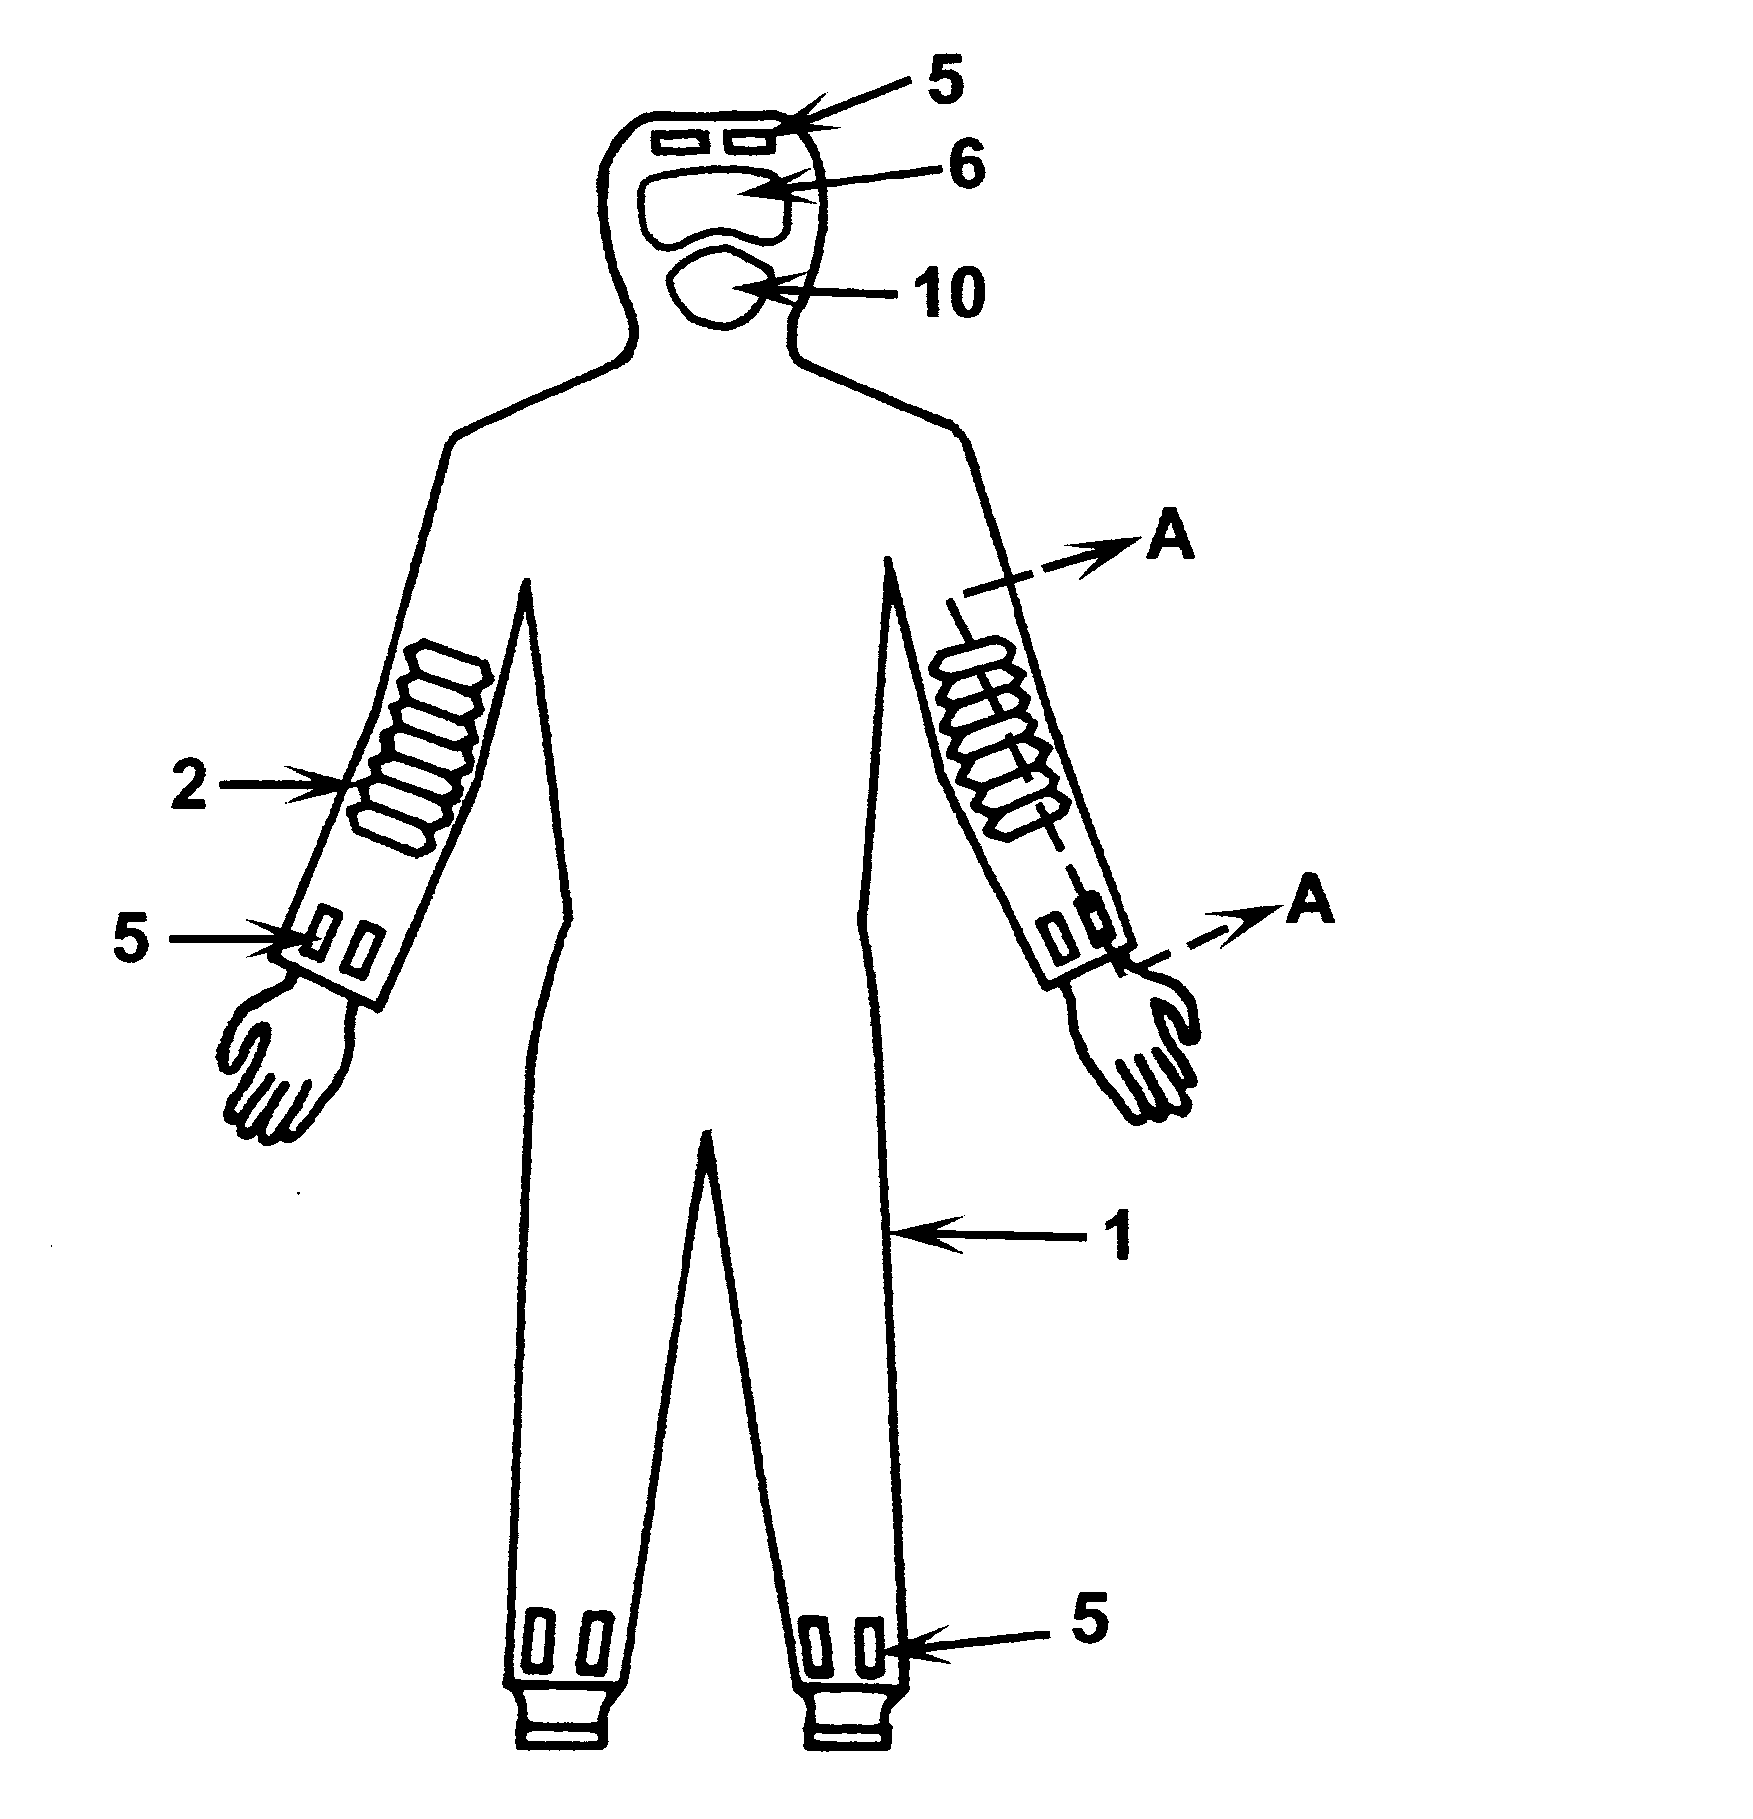 Protective suit ventilated by self-powered bellows